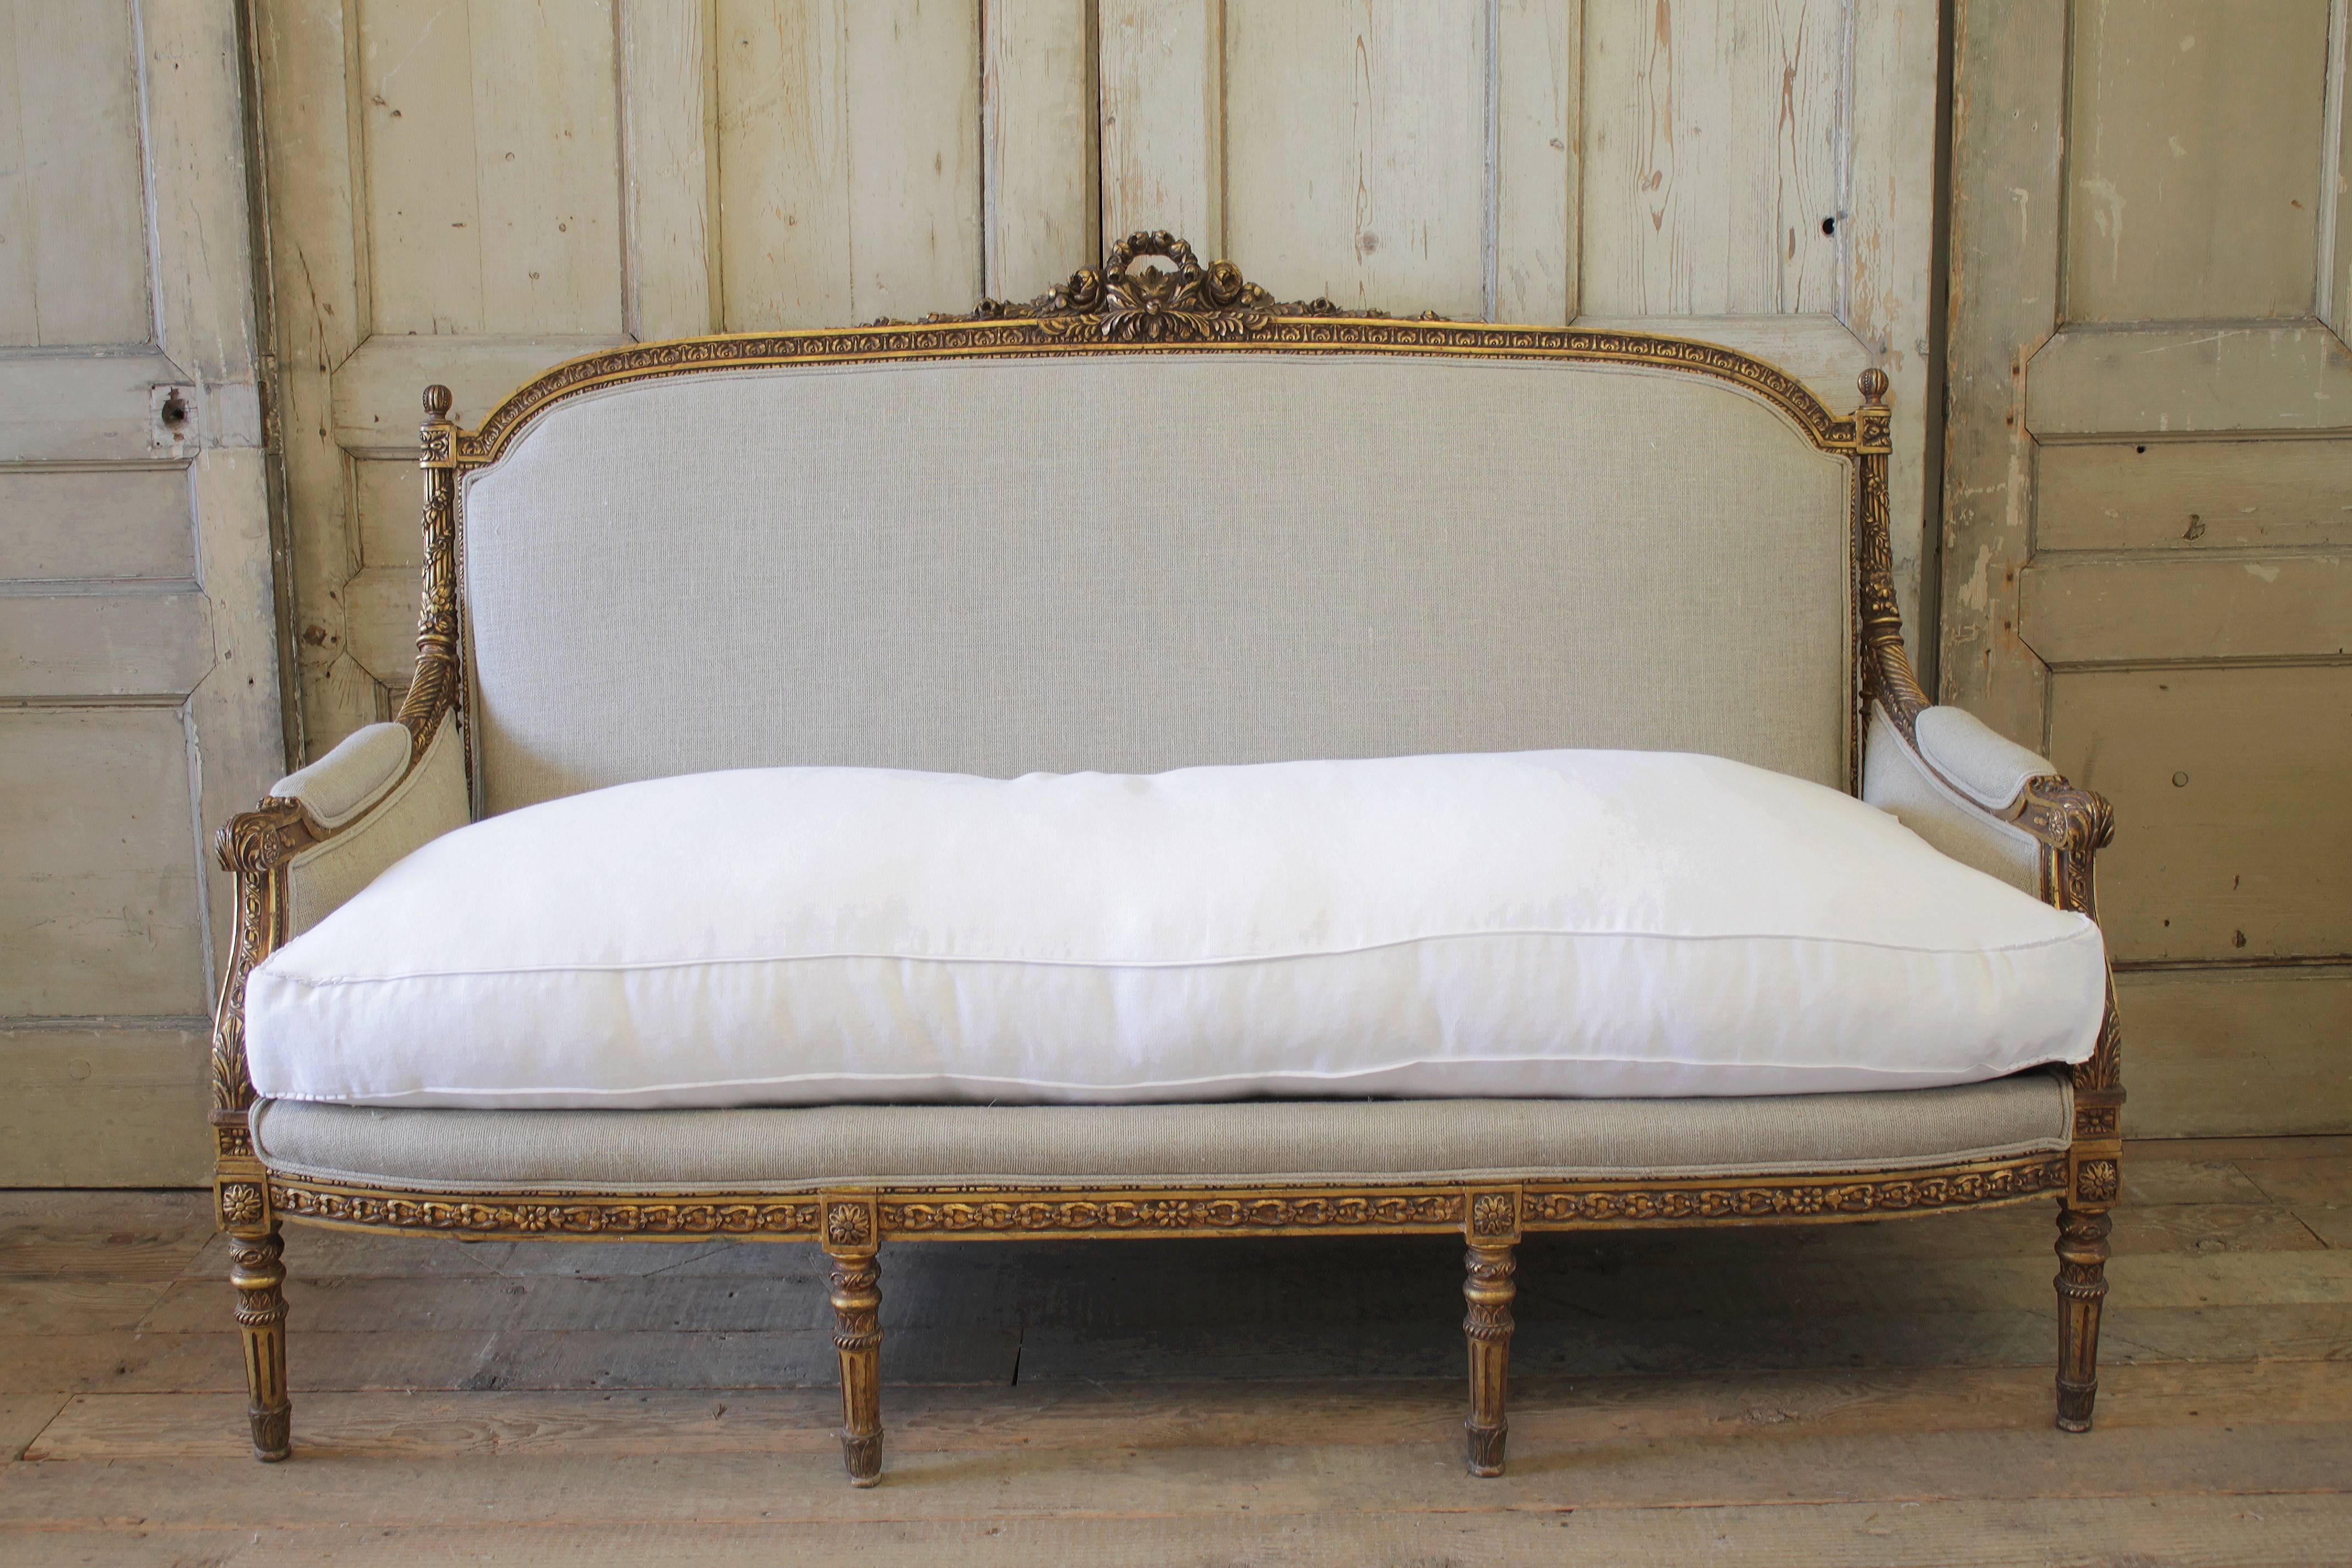 Fabulous French sofa in the Louis XVI style. This sofa is one of our favorites, it has a large carved rose wreath, with intricate carved details along the frame. There are carved finials, with a floret and carved roses trailing around the fluted